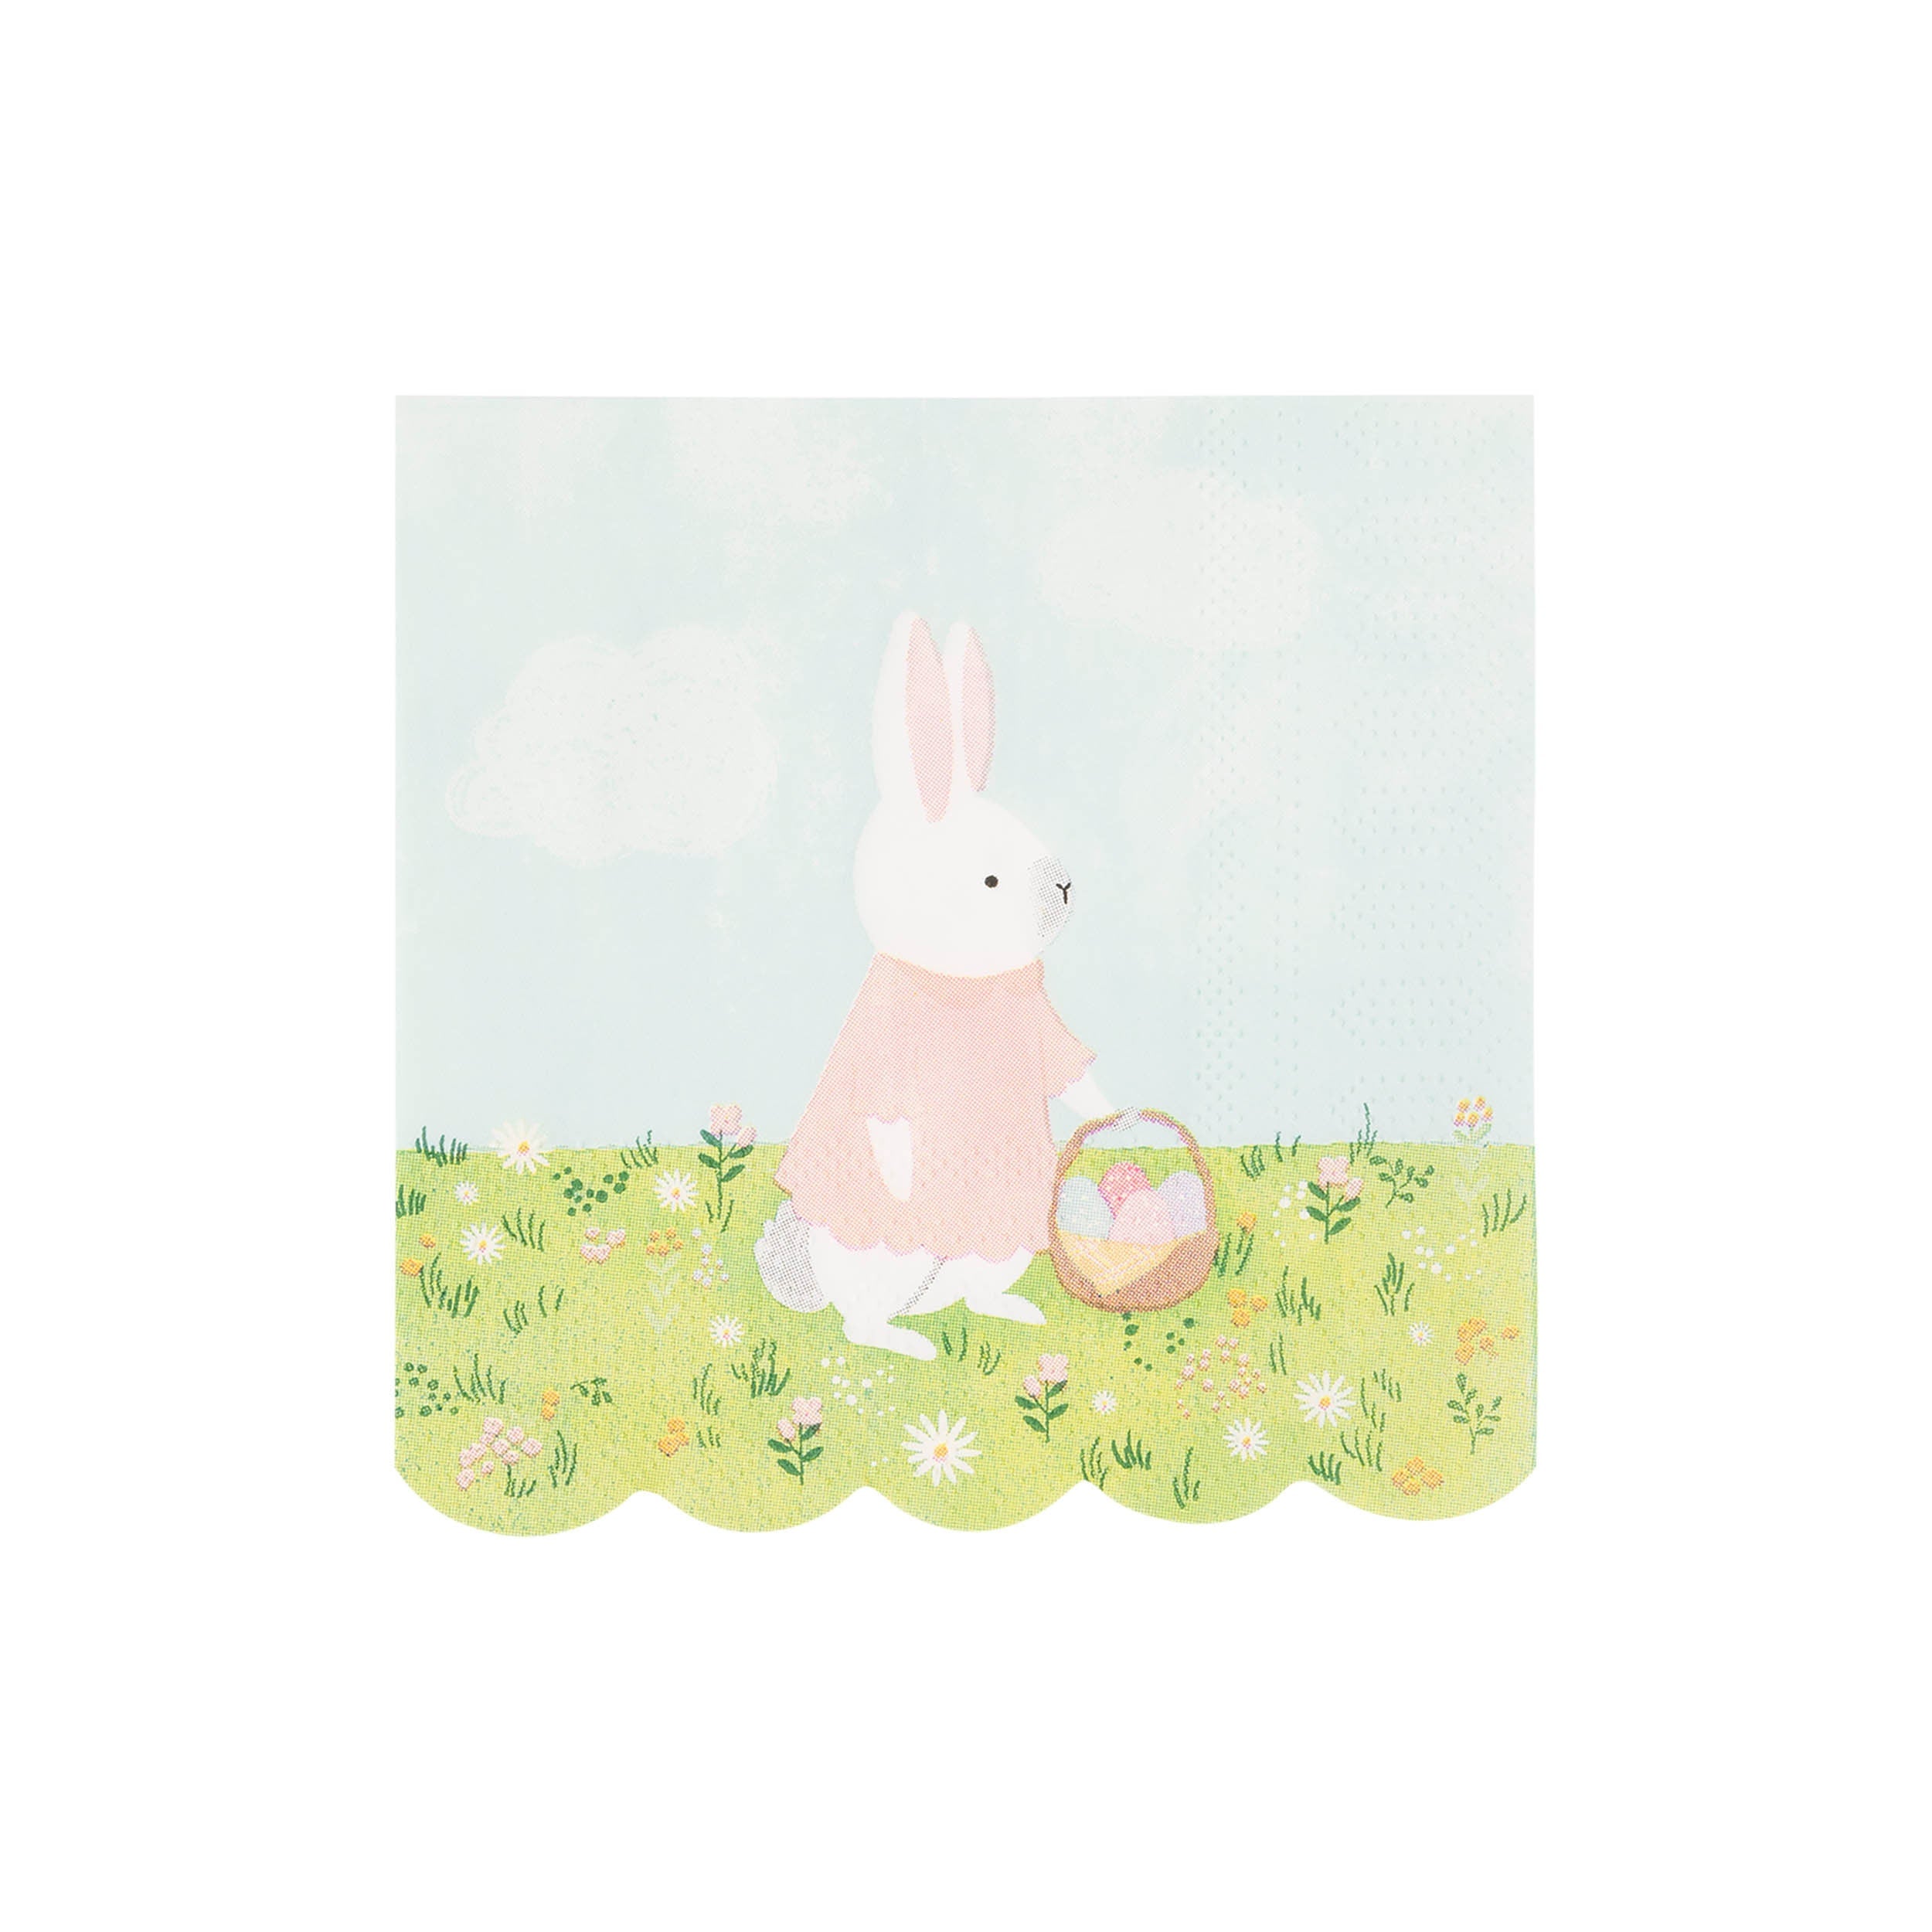 Bunny Napkins | Easter Napkins - Easter Paper Napkin - Easter Tableware - Easter Party - Bunny Birthday Party - Bunny Party - Rabbit Napkins